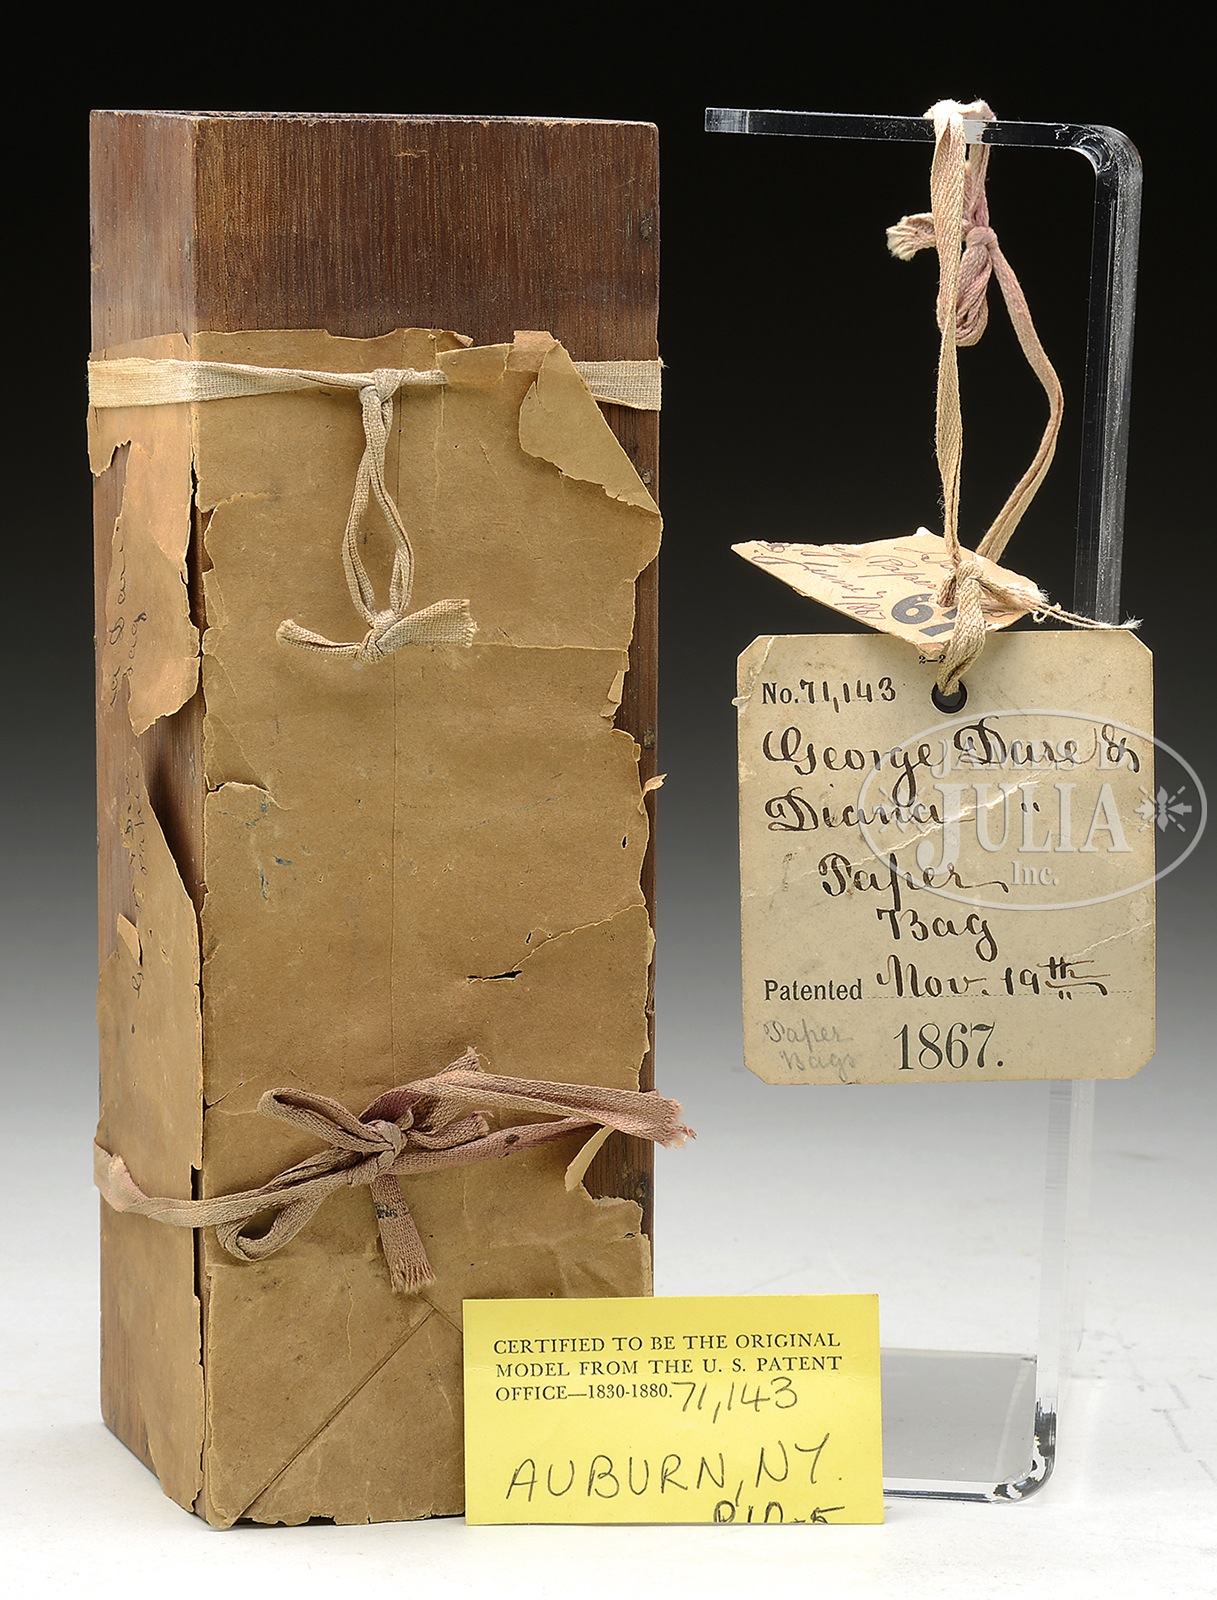 PATENT MODEL FOR A PAPER BAG. The remnants of the paper bag is tied around a wood box. The